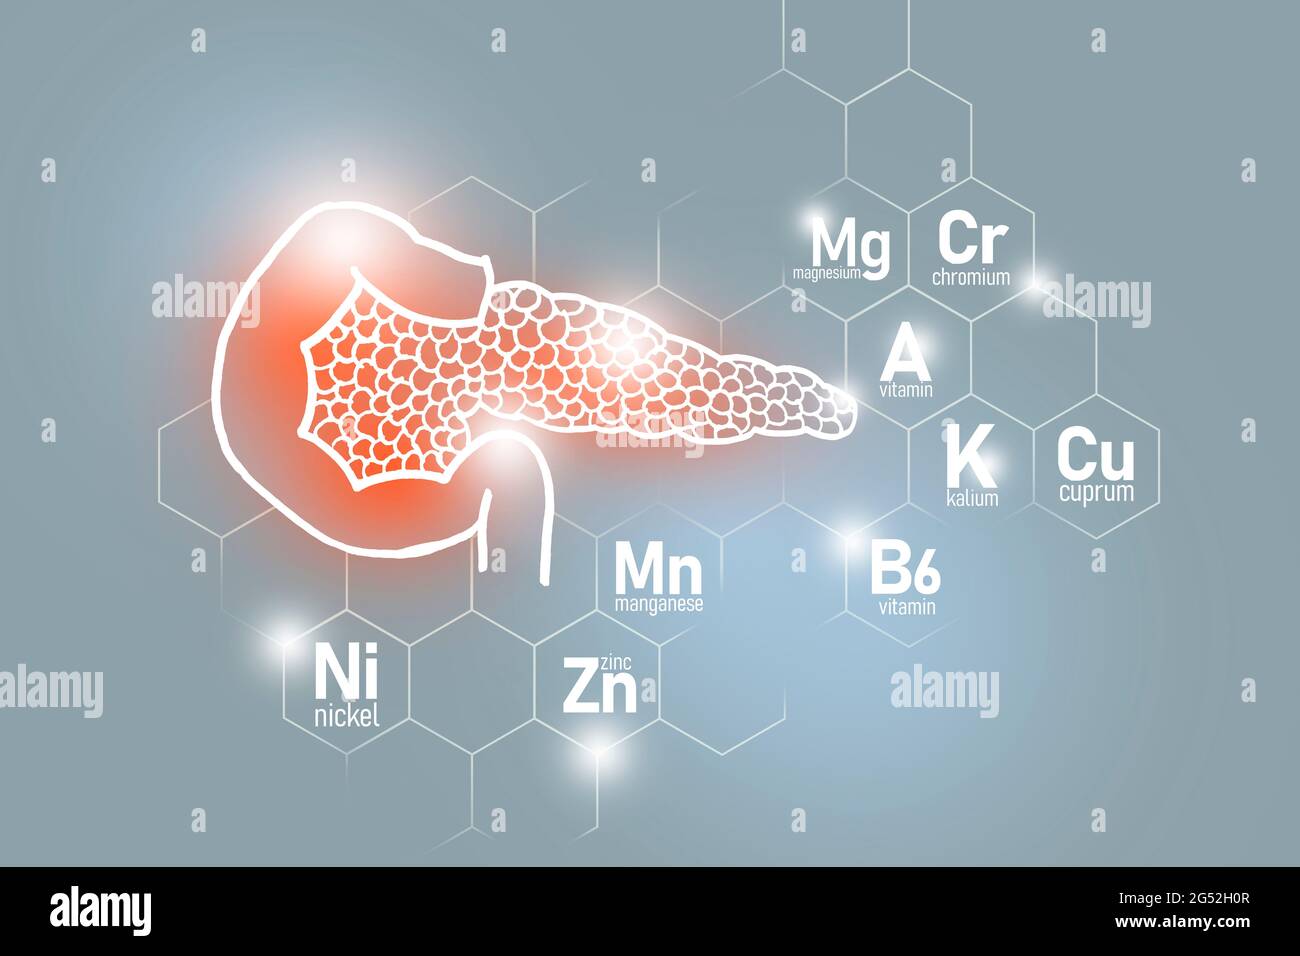 Essential nutrients for Pancreas health including Nickel, Chromium, Cuprum, Manganese. Design set of human organs on light grey background. Stock Photo